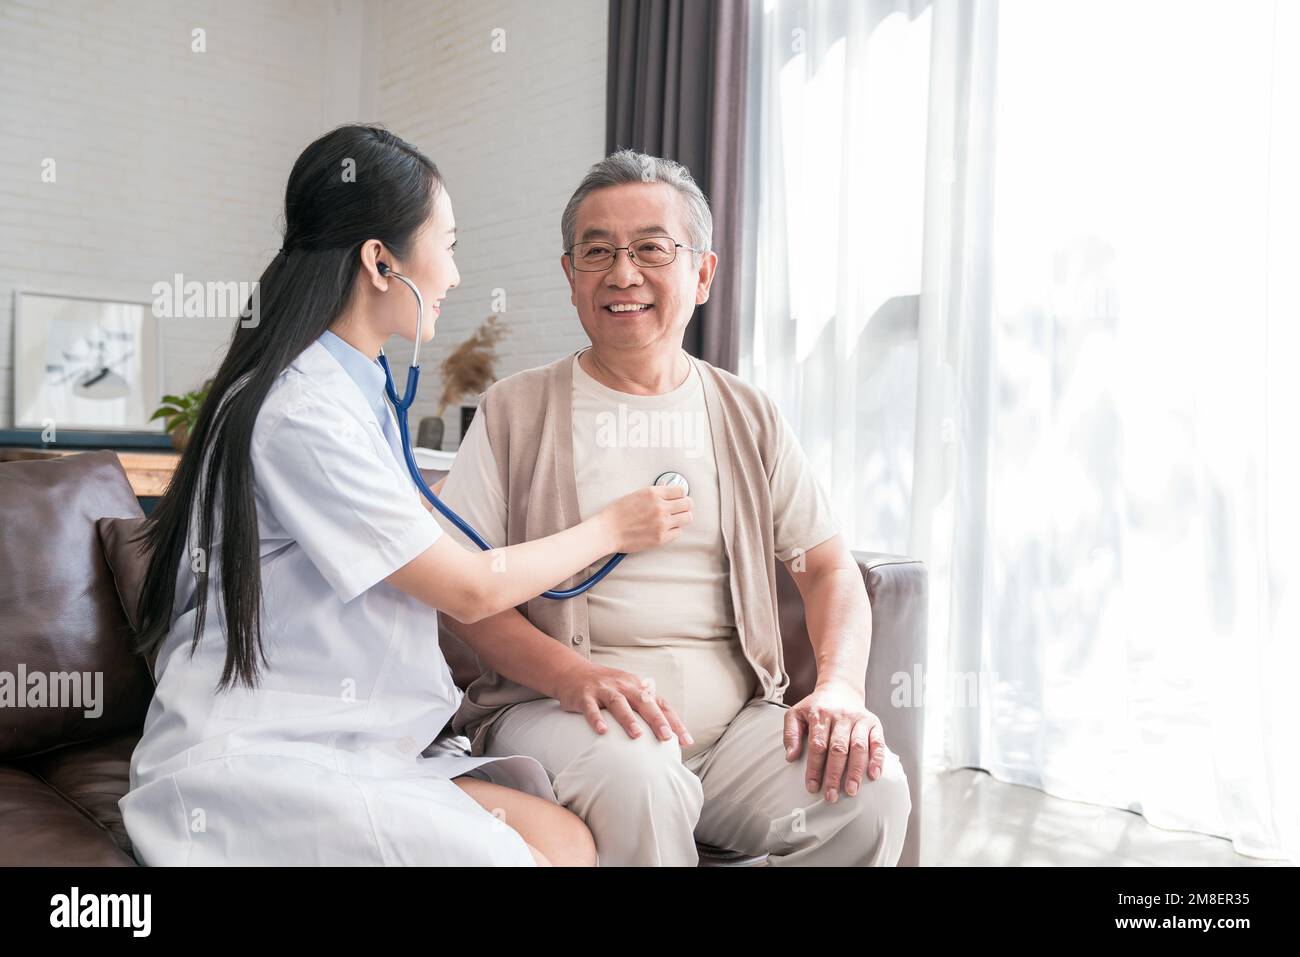 Young woman doctor to examine a older men Stock Photo